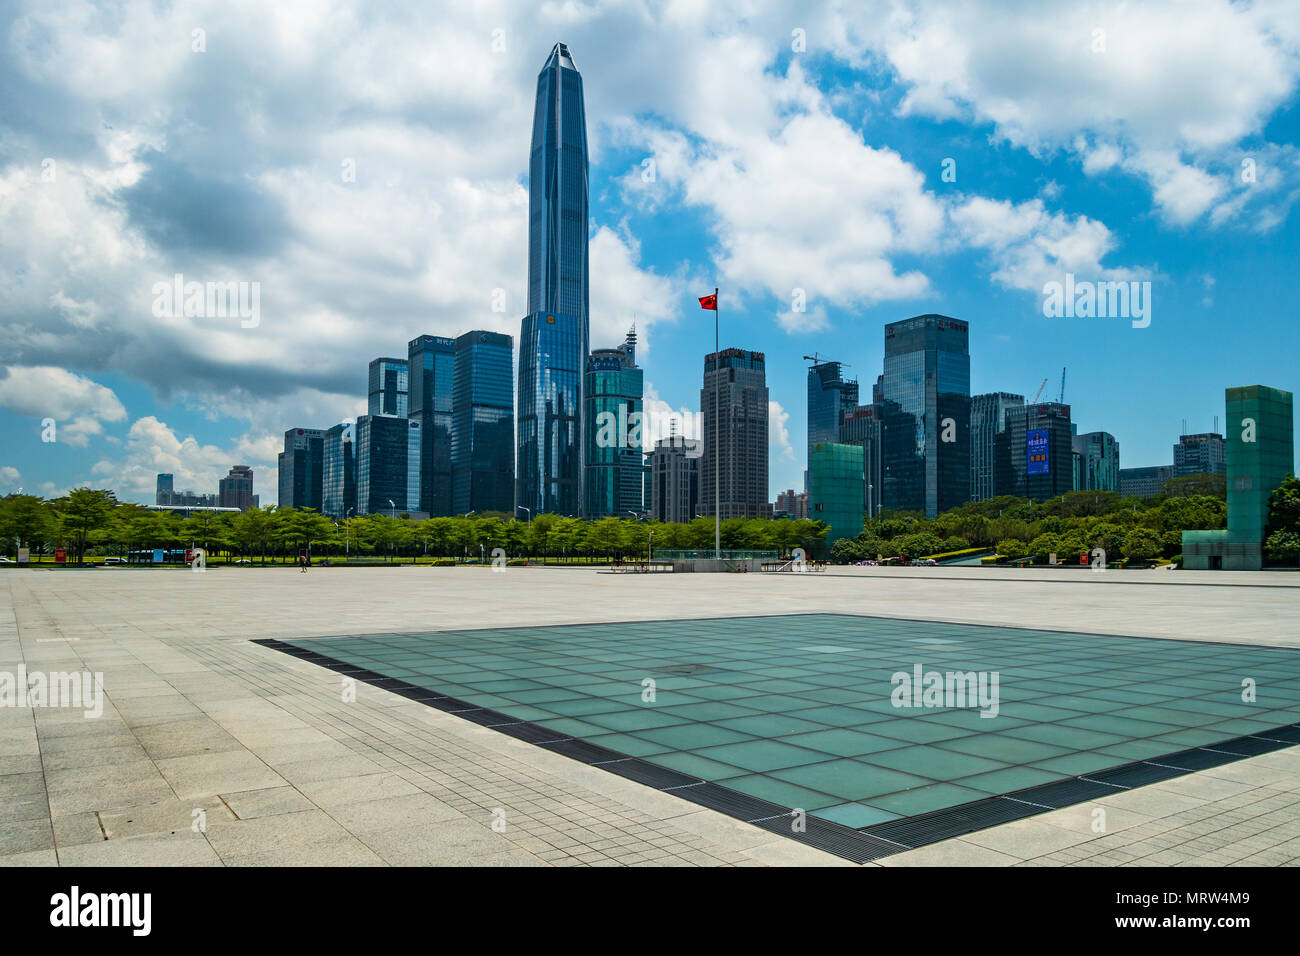 Shenzhen skyline and cityscape, Ping An tower tallest building in Futian district of Shenzhen, China Stock Photo